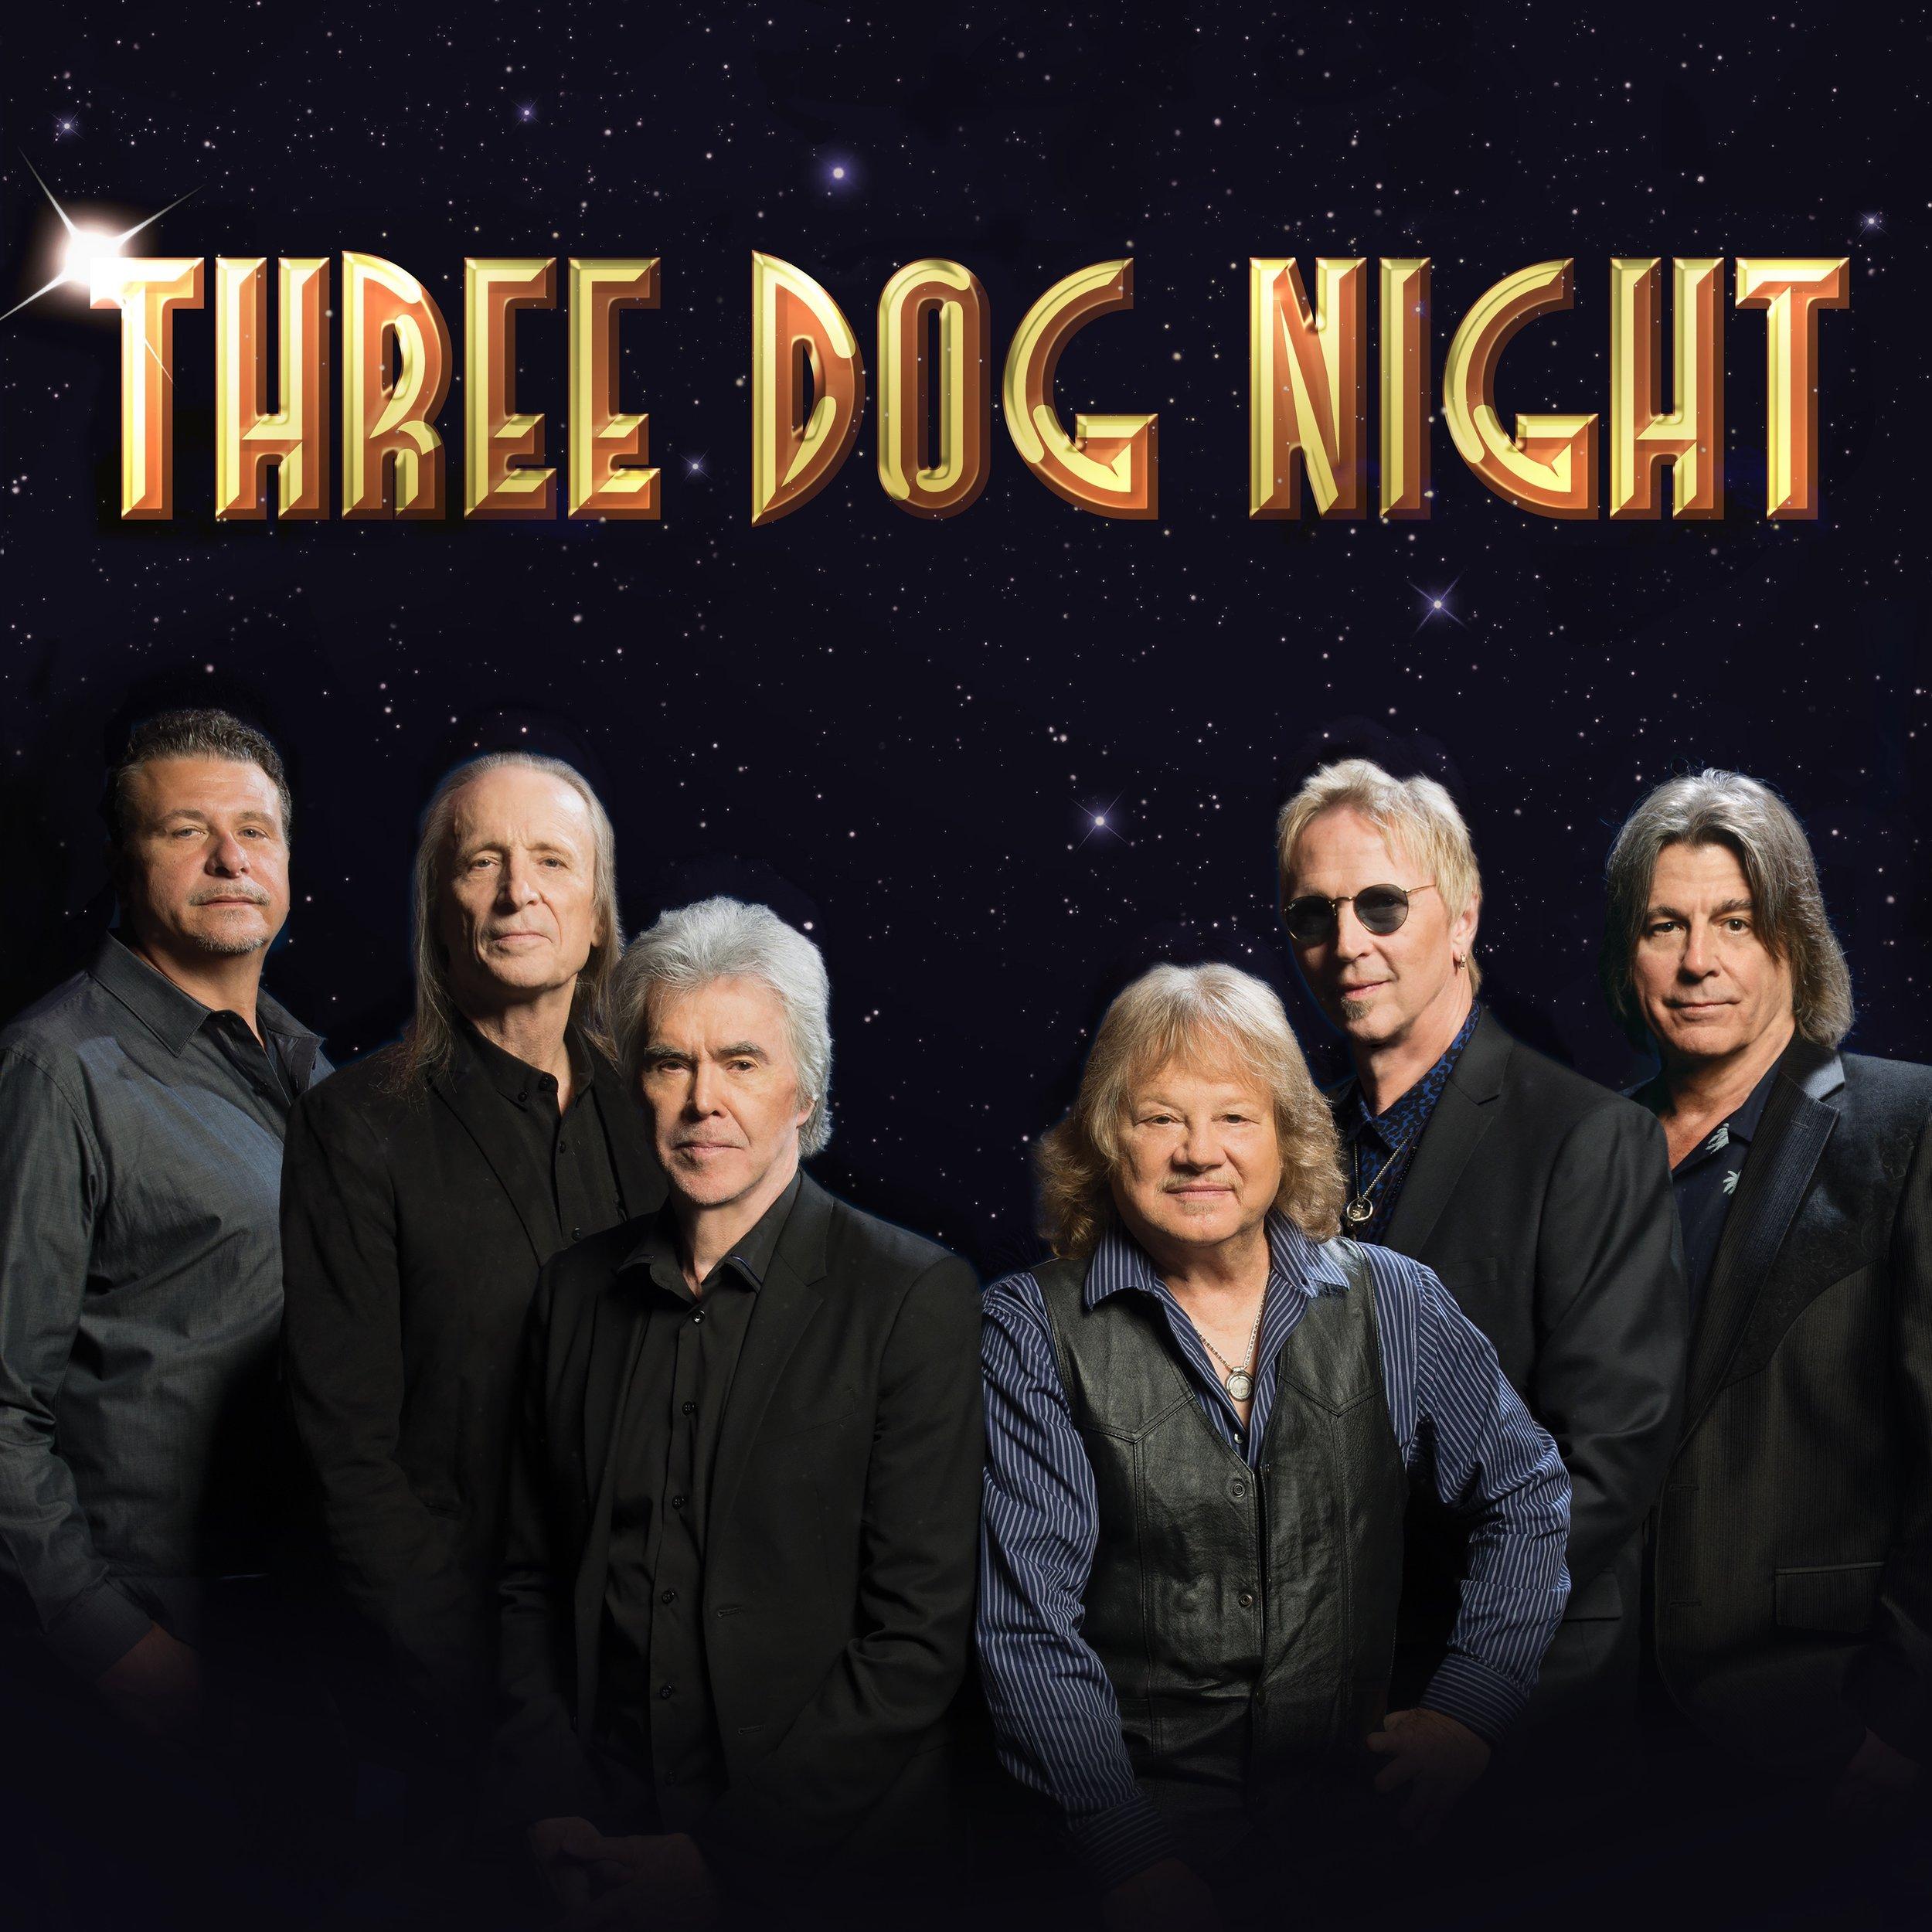 Three Dog Night announce June 23 show at the Fox The SpokesmanReview